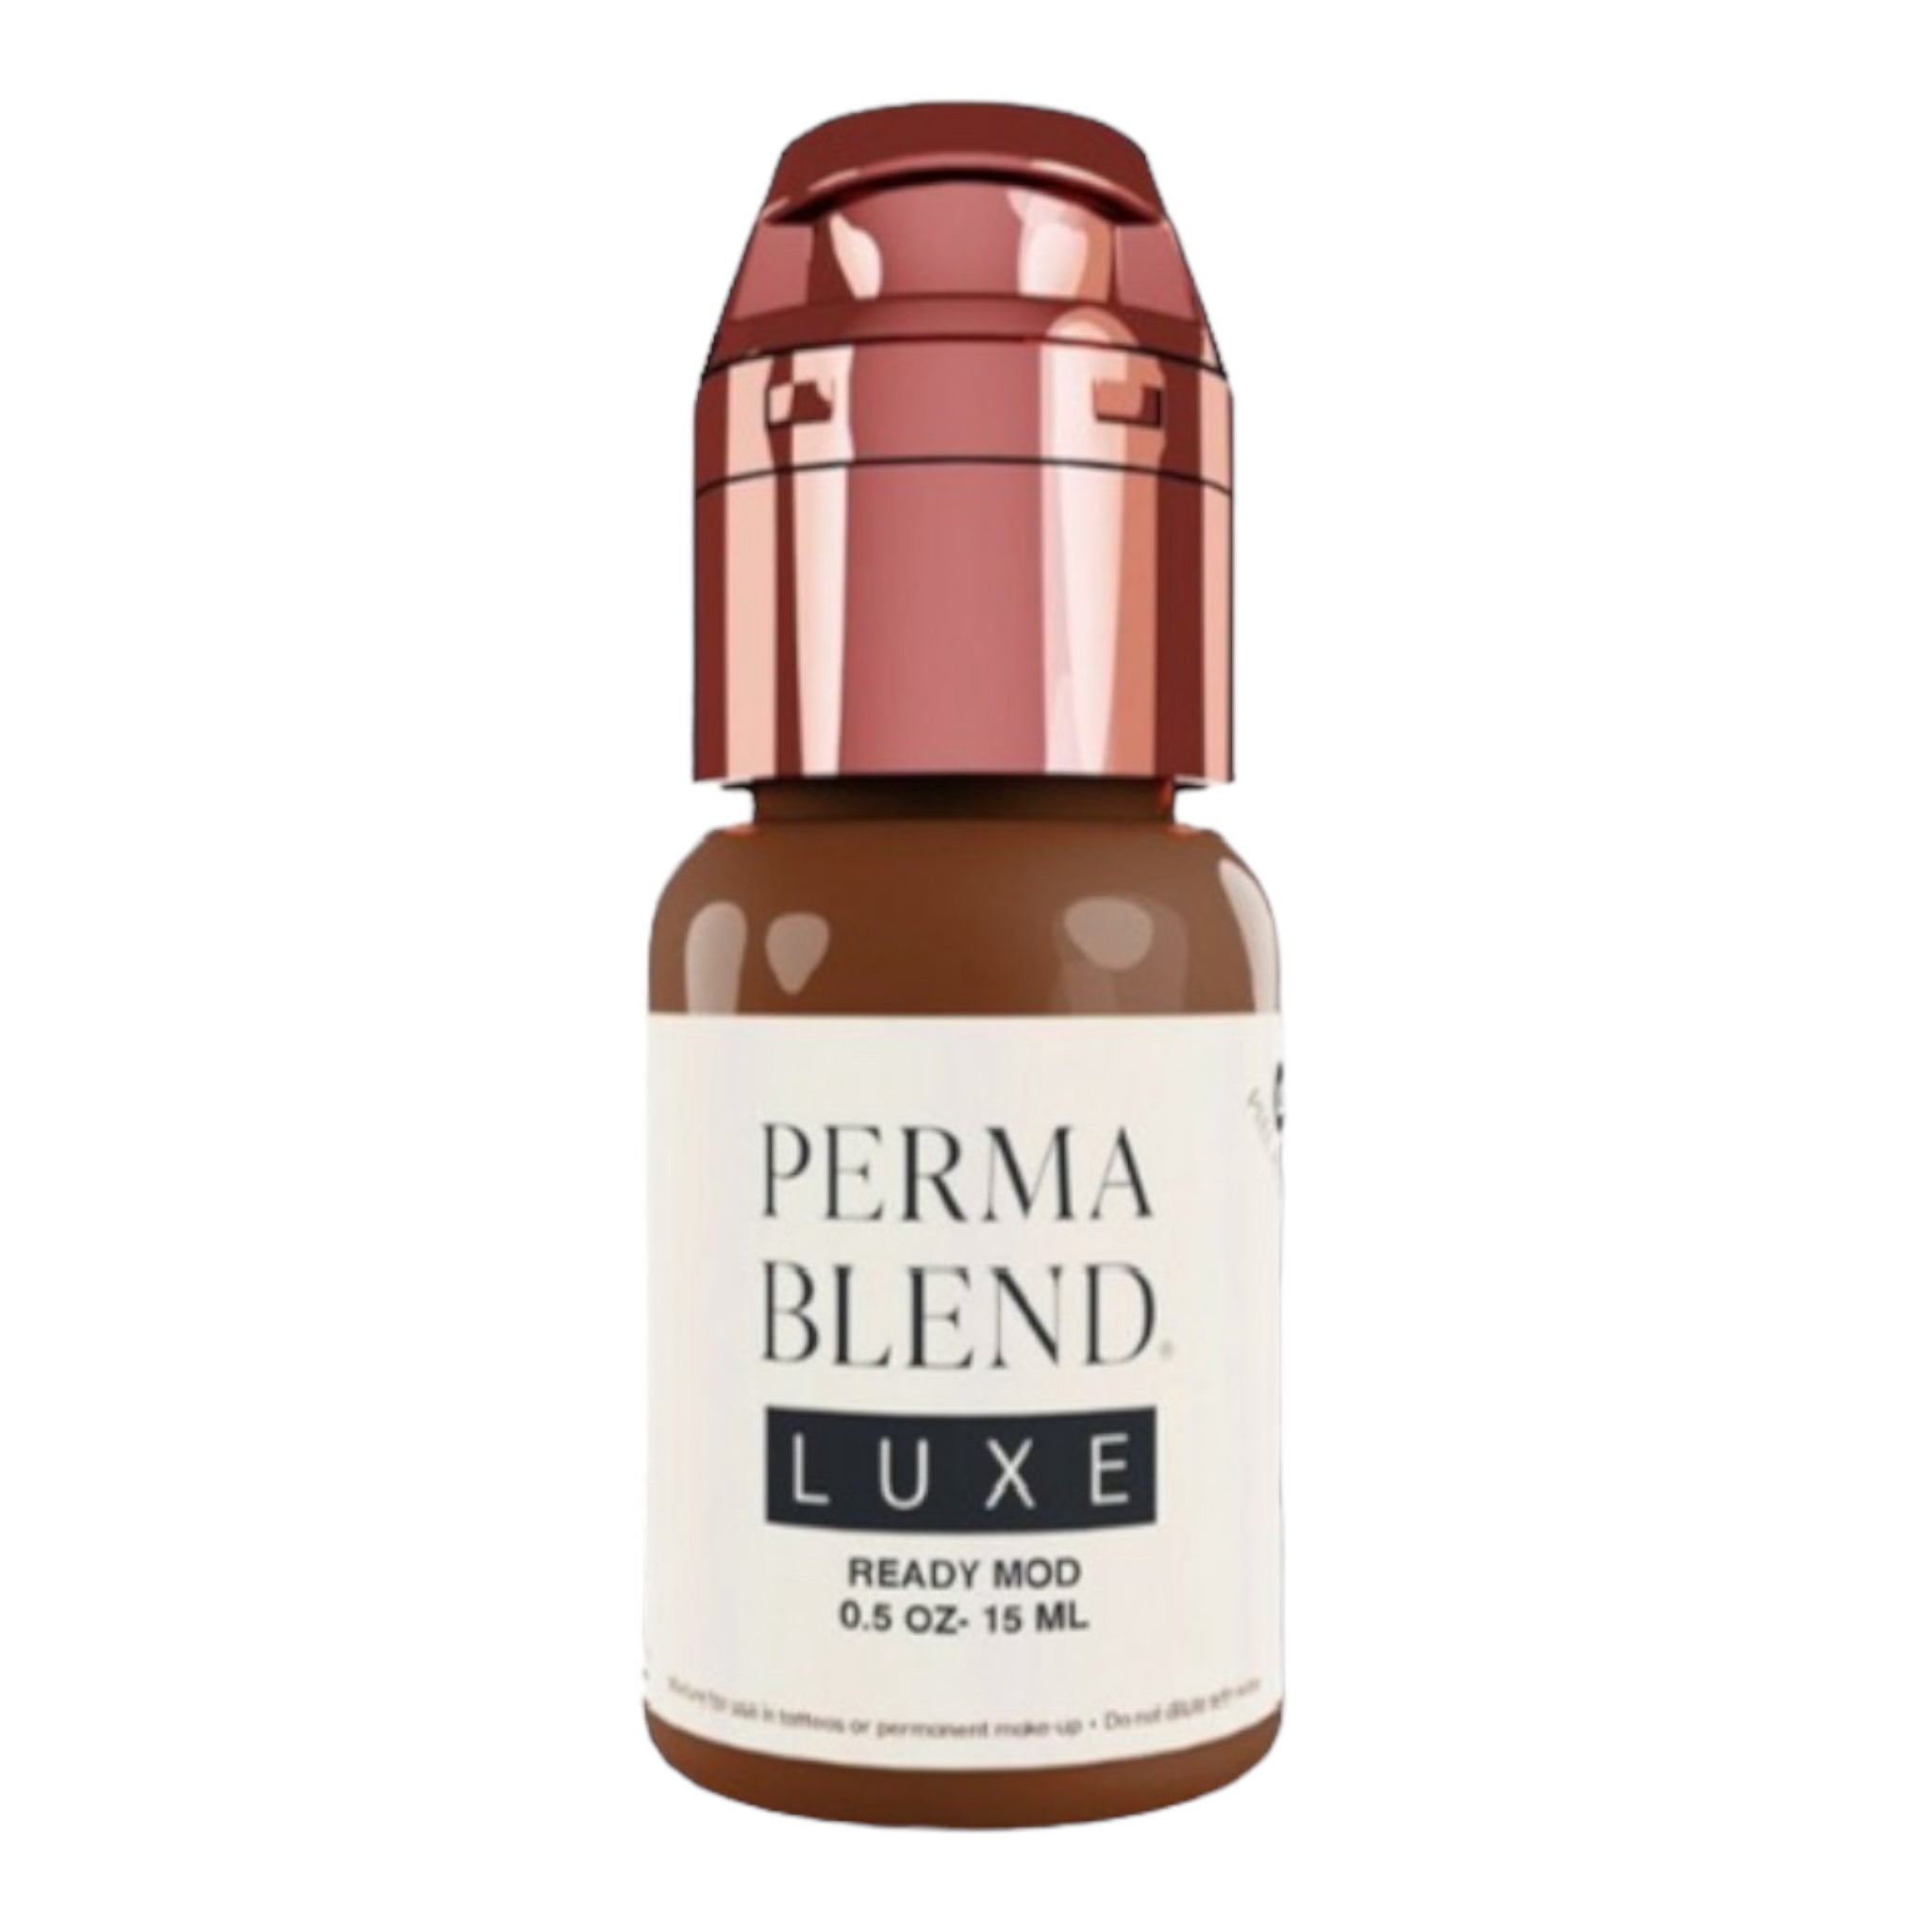 Encre Maquillage Perma Blend Luxe 15ml - Ready Mod